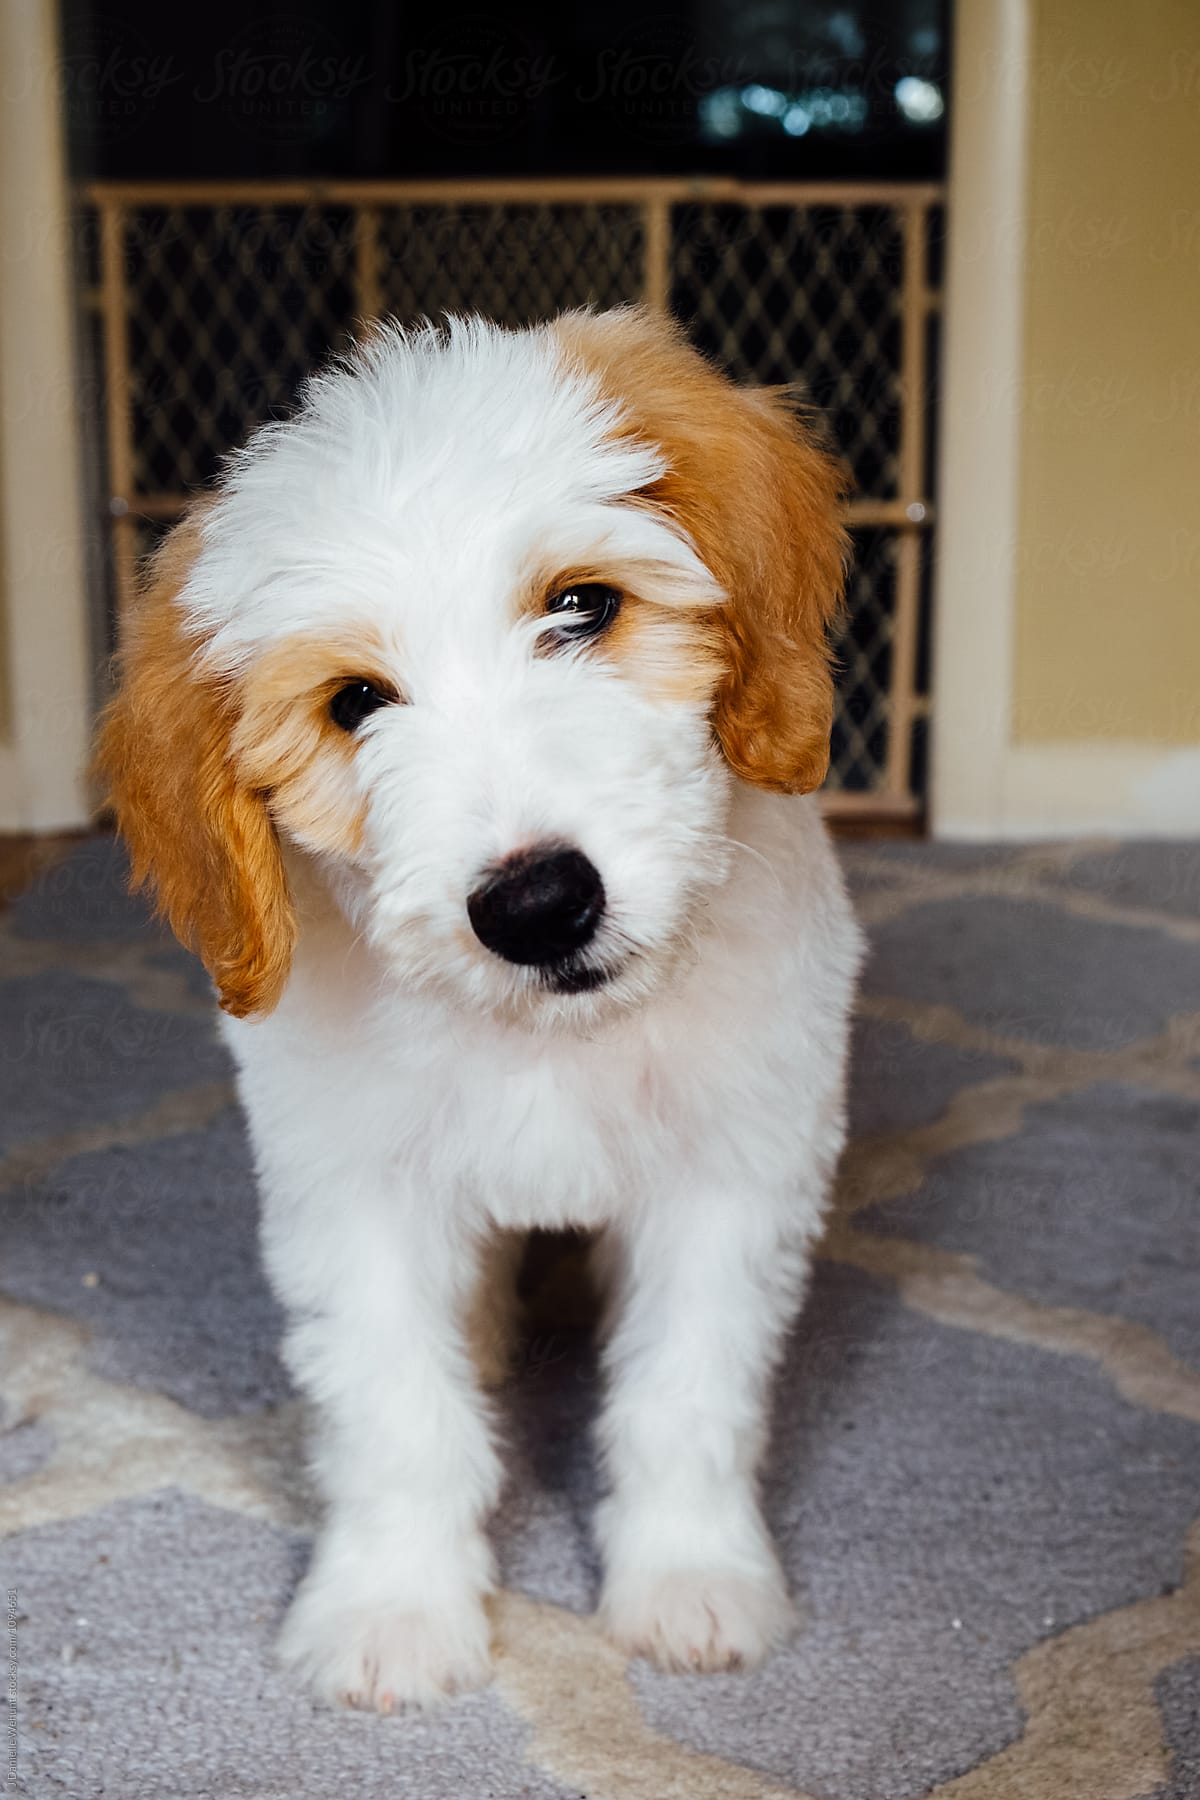 A White and Brown Golden Doodle Puppy sitting on carpet in front of baby gate